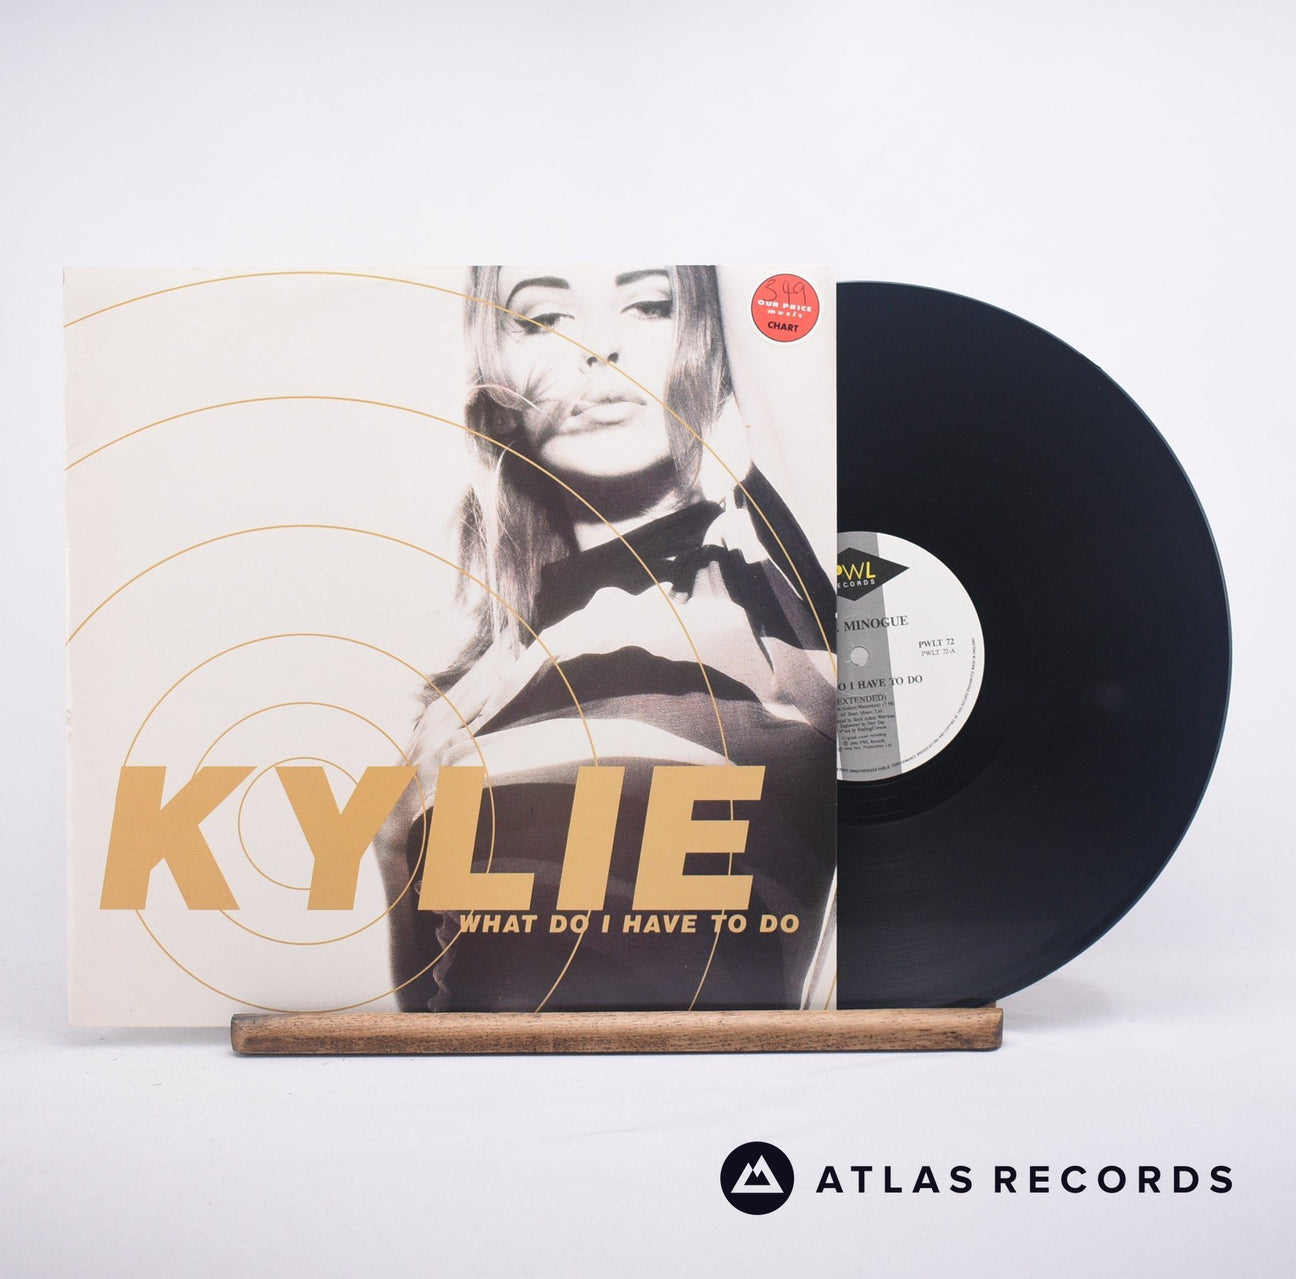 Kylie Minogue What Do I Have To Do 12" Vinyl Record - Front Cover & Record